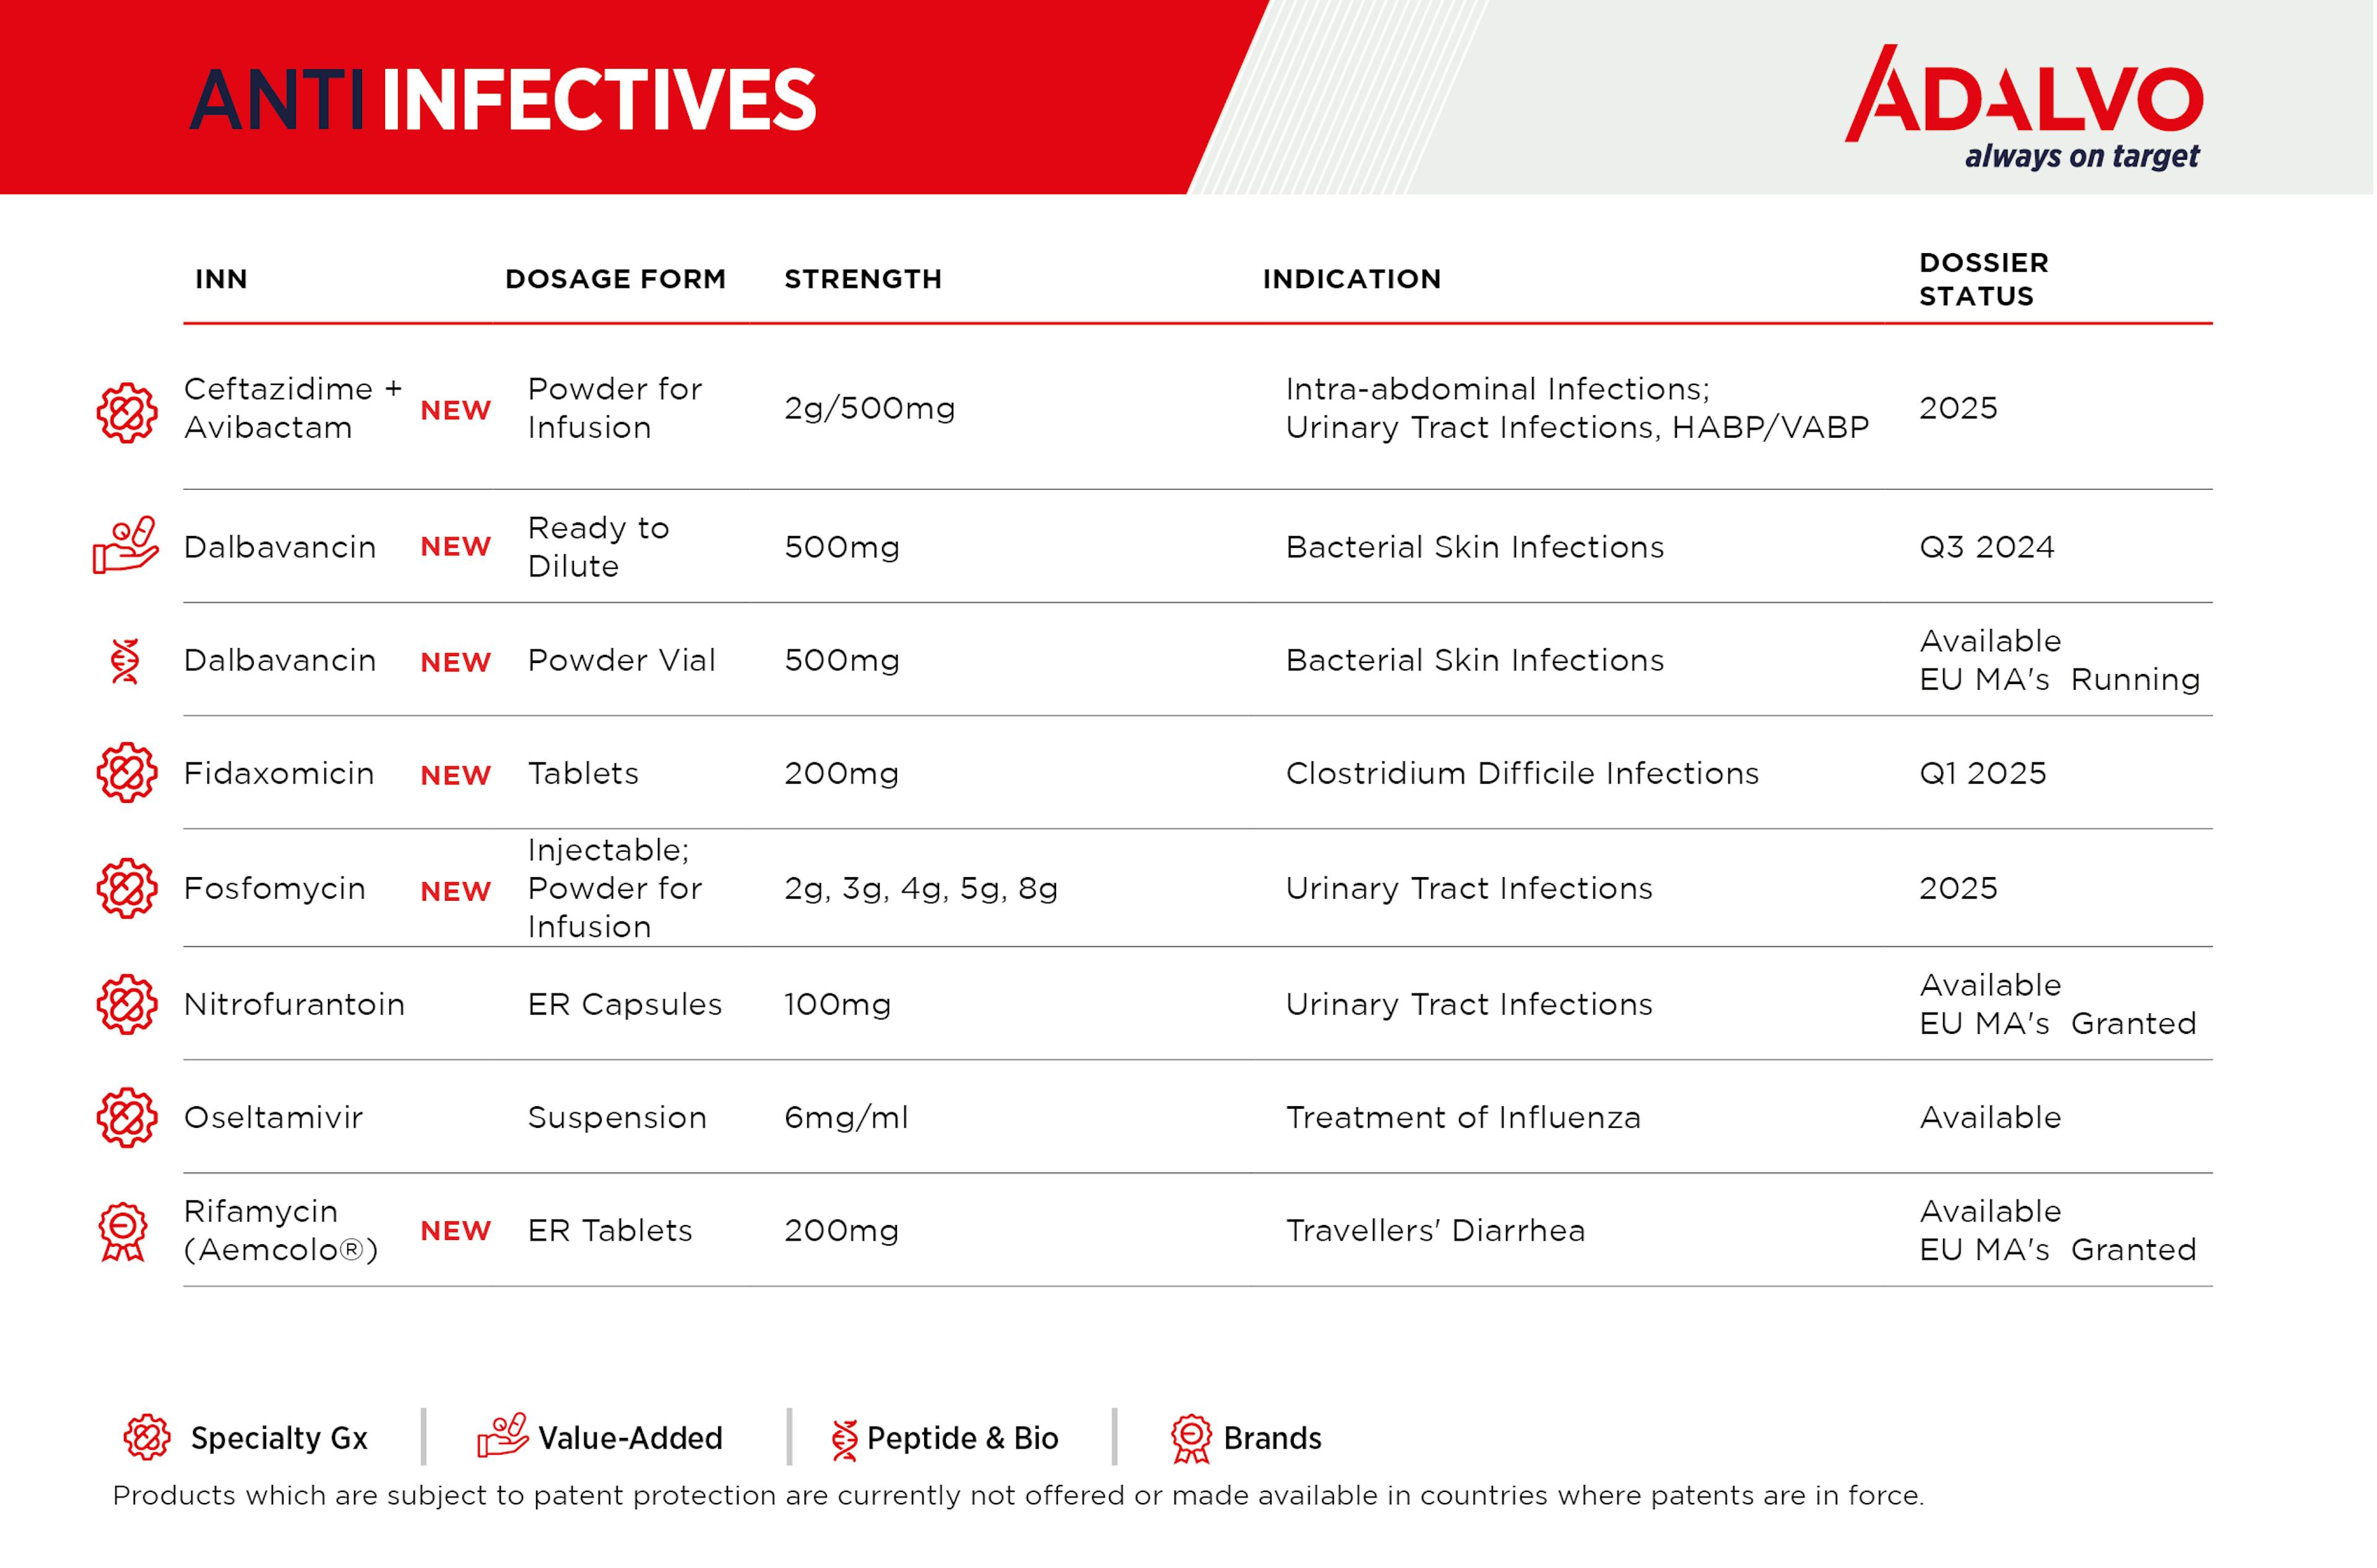 Adalvo's Anti-Infectives Dossiers